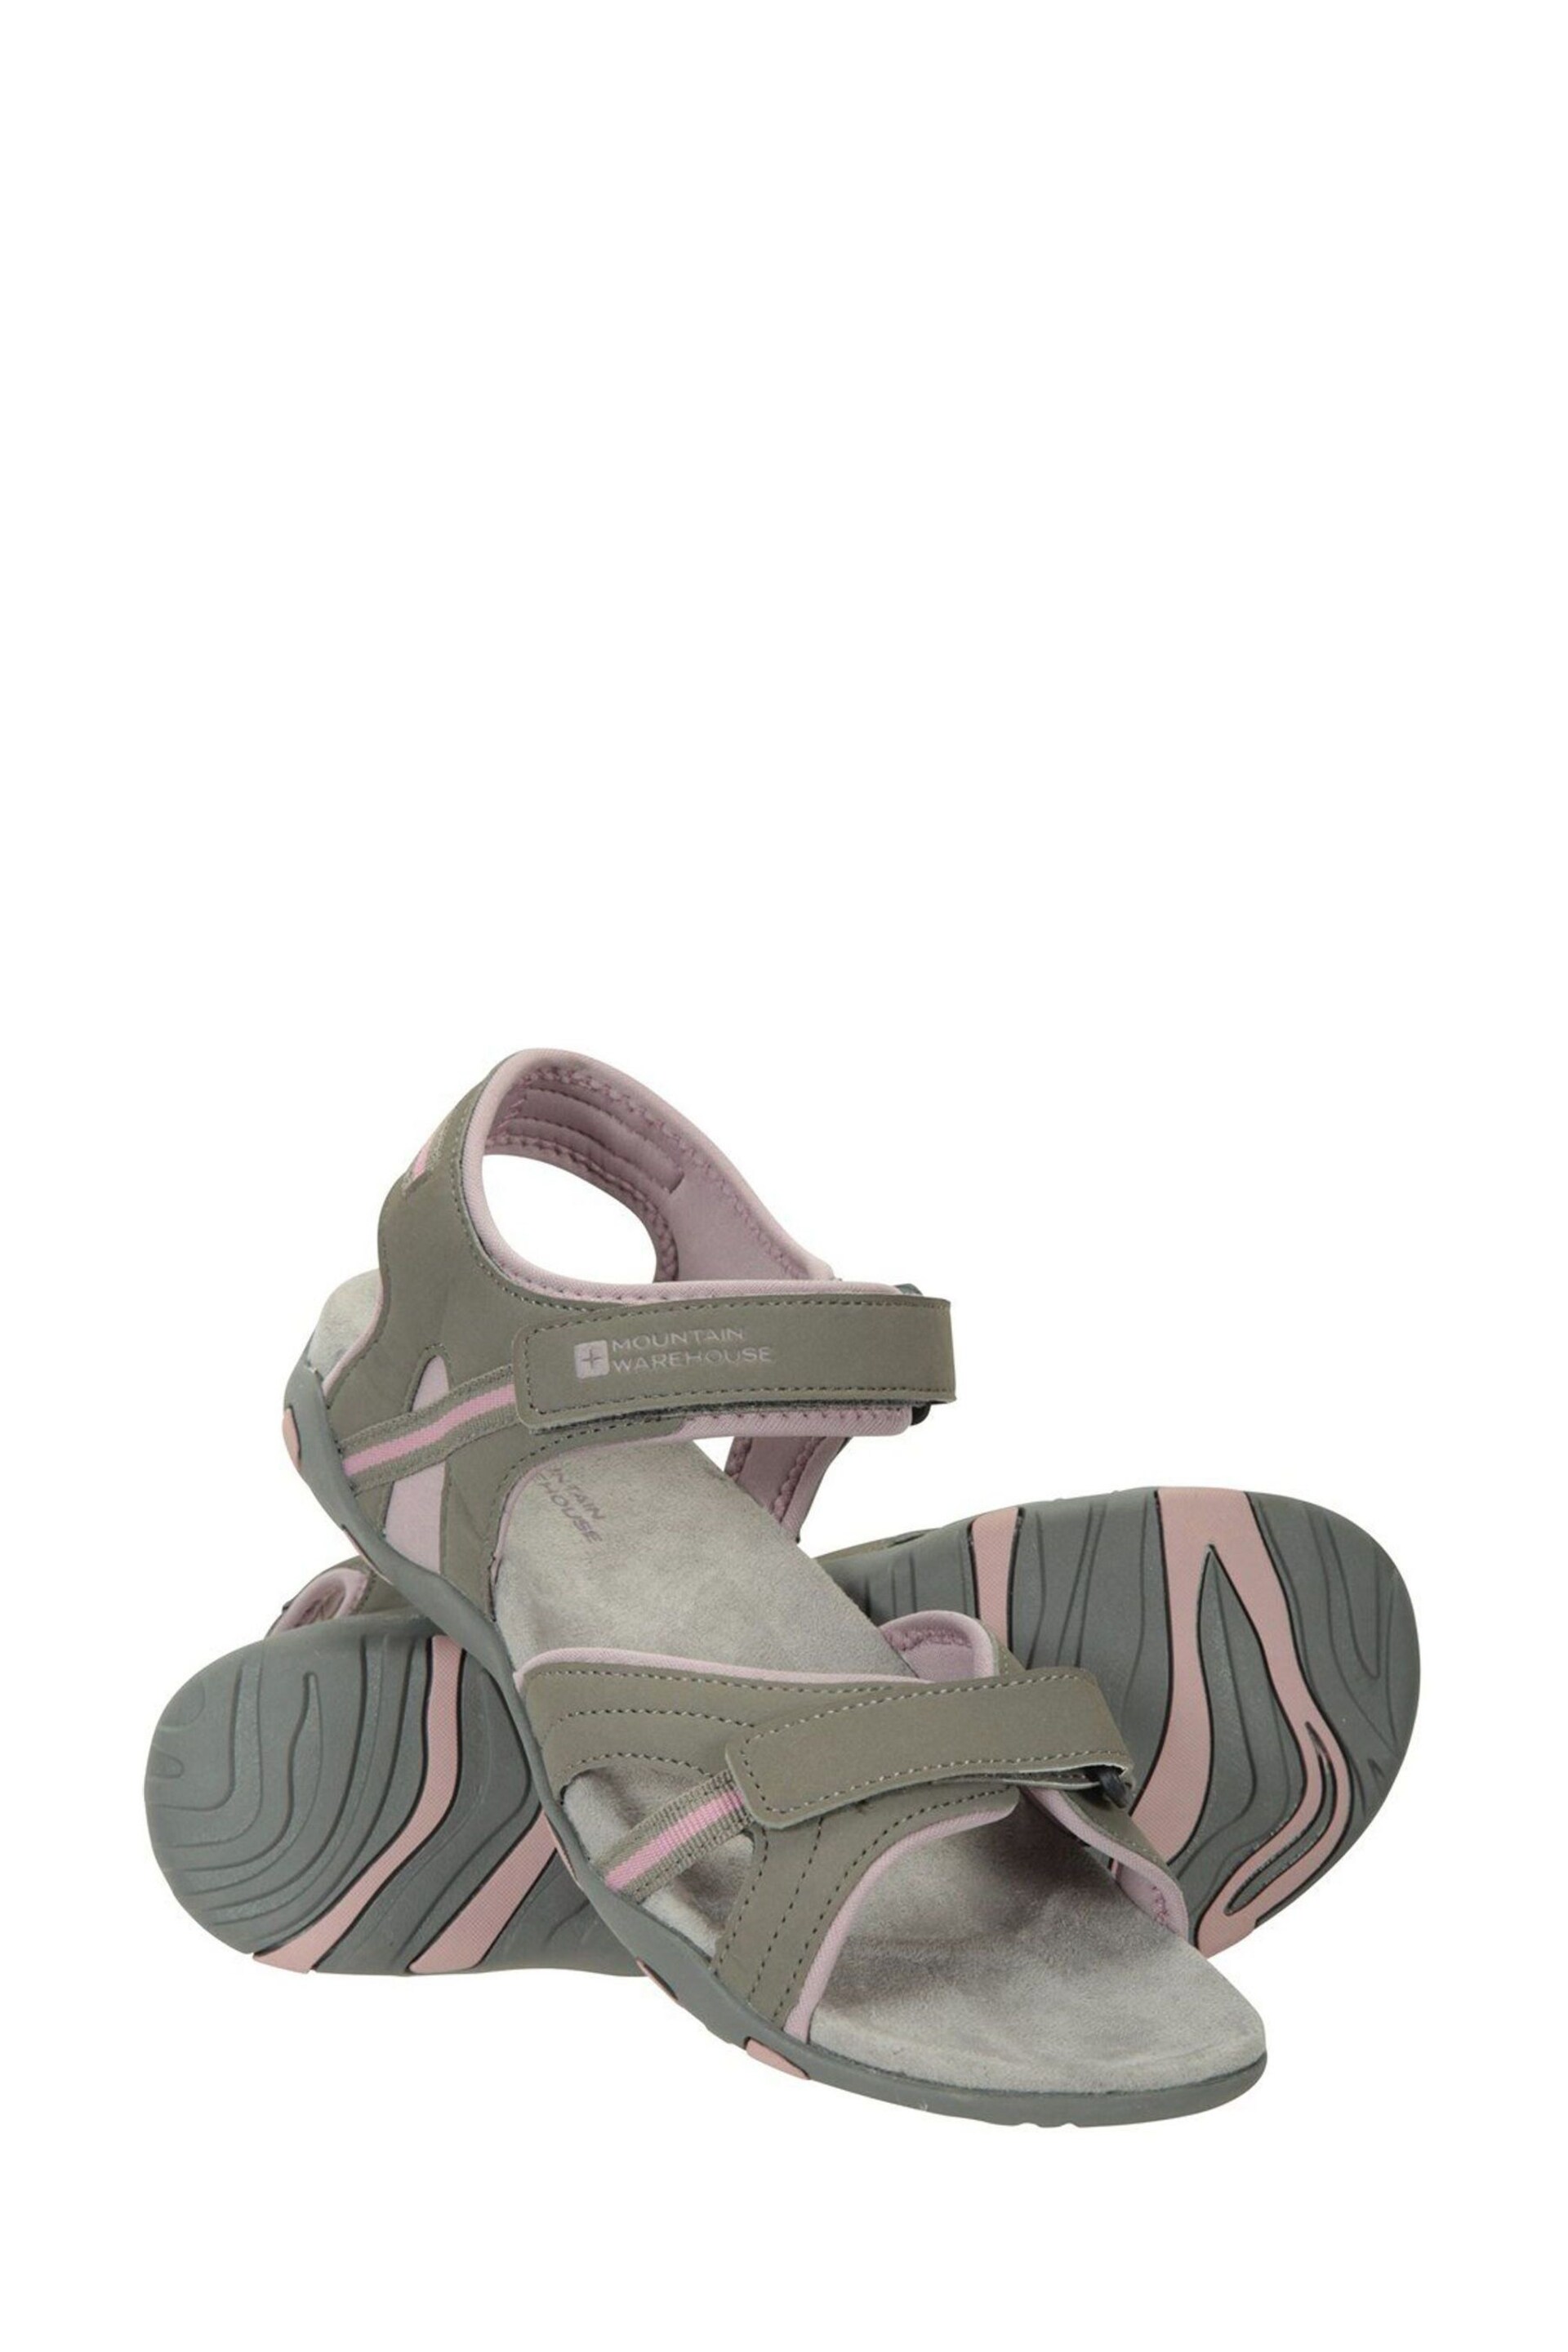 Mountain Warehouse Pink Womens Oia Summer Walking Sandals - Image 1 of 4